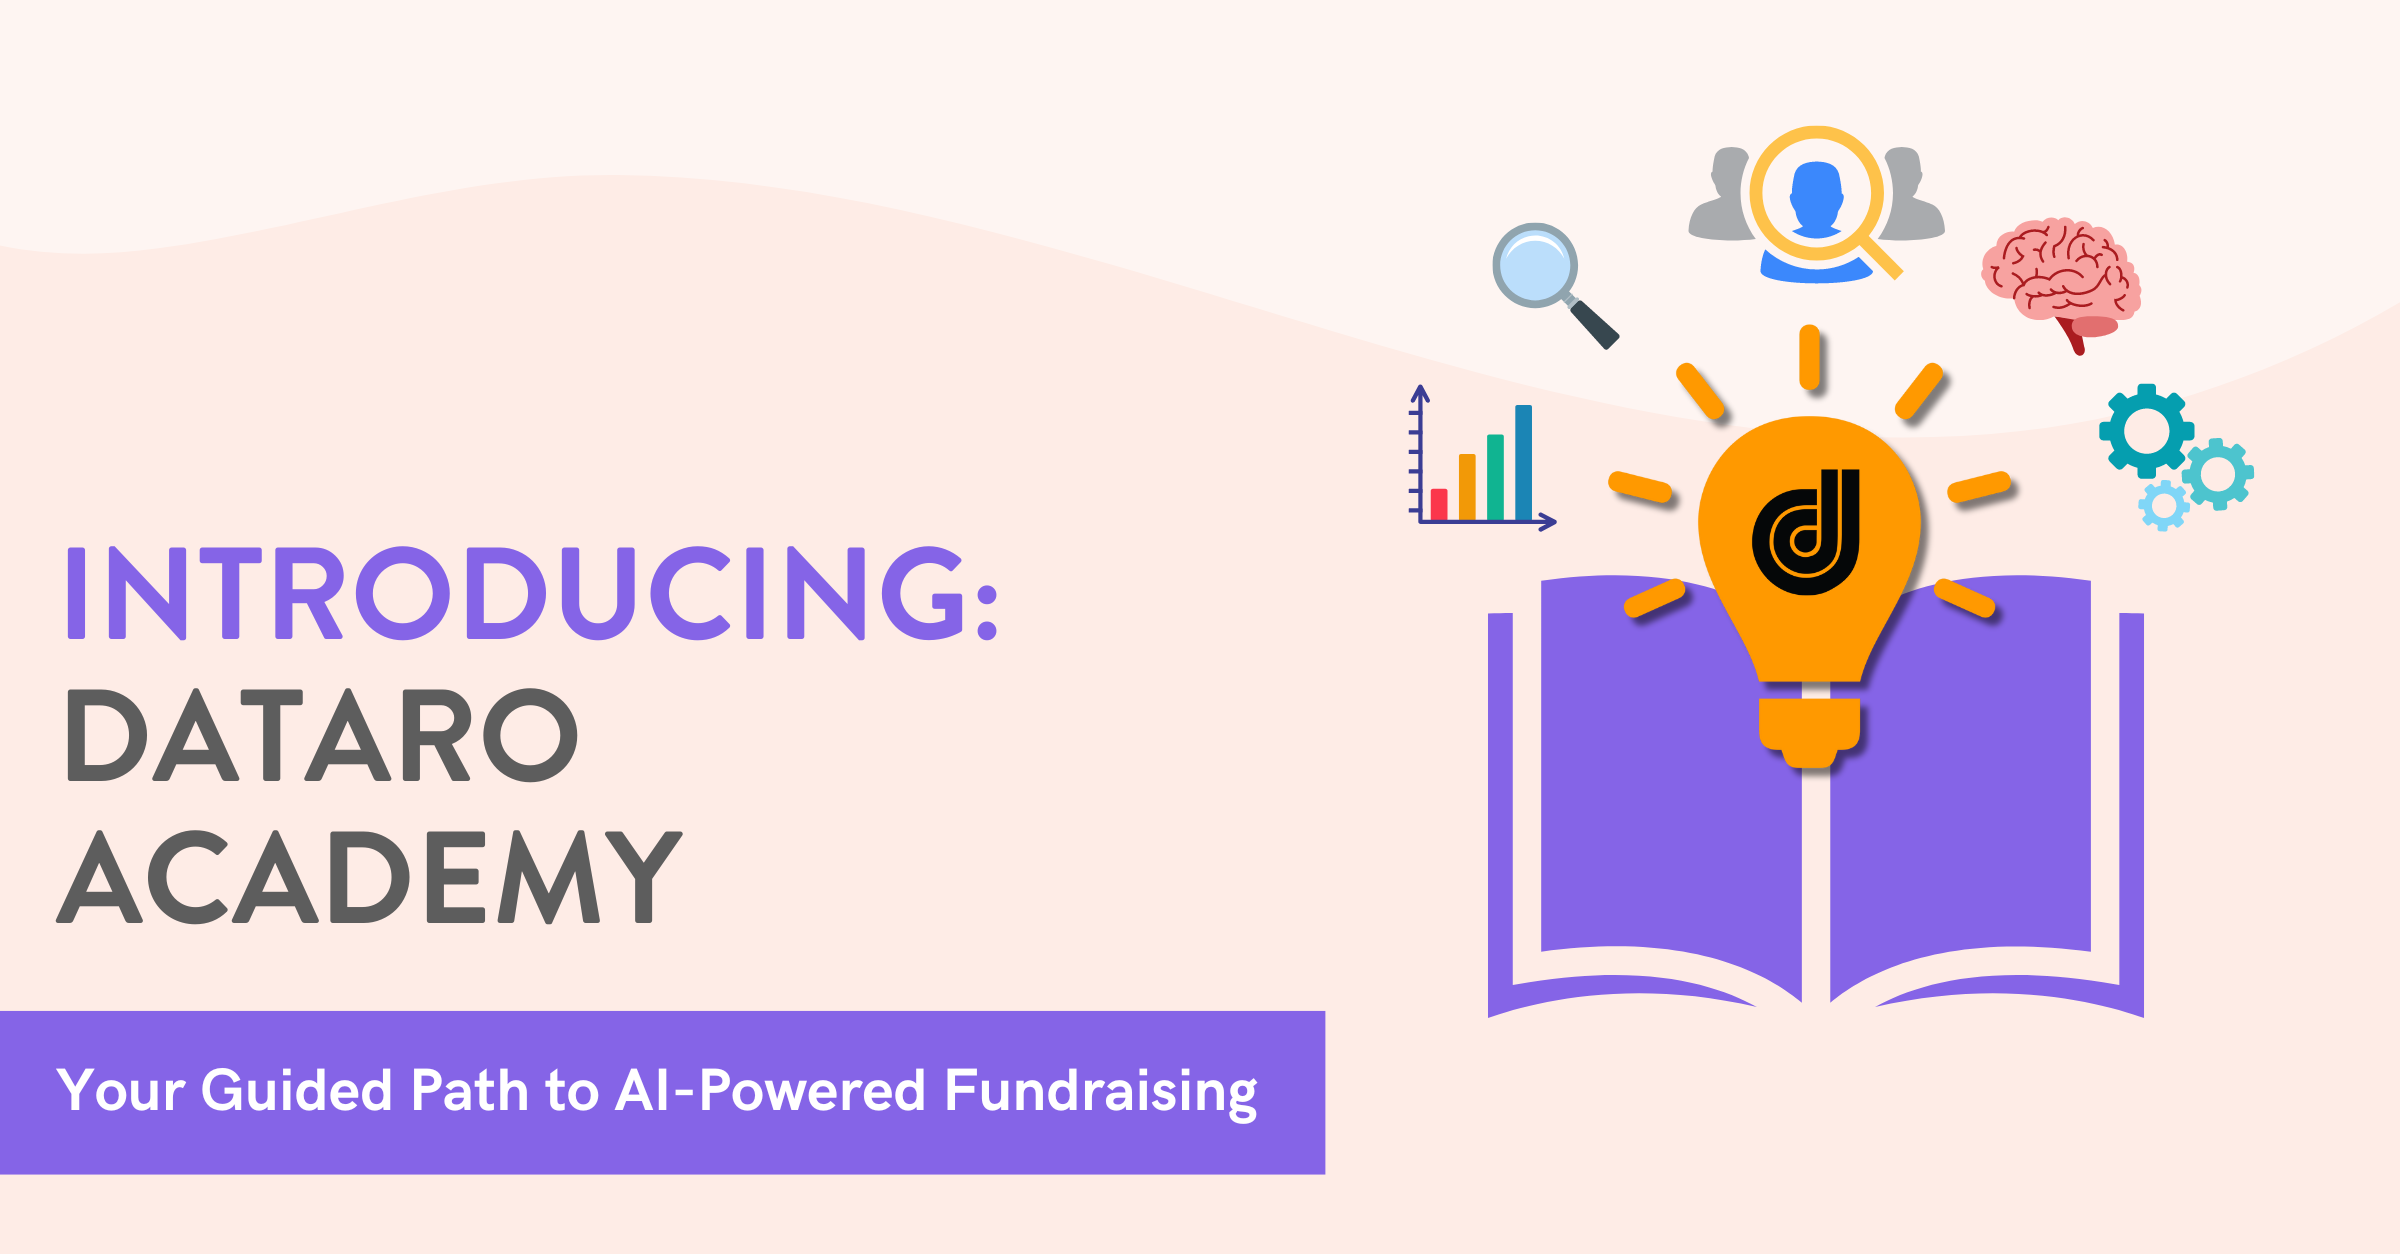 >Introducing Dataro Academy: Your Path to AI-Powered Fundraising